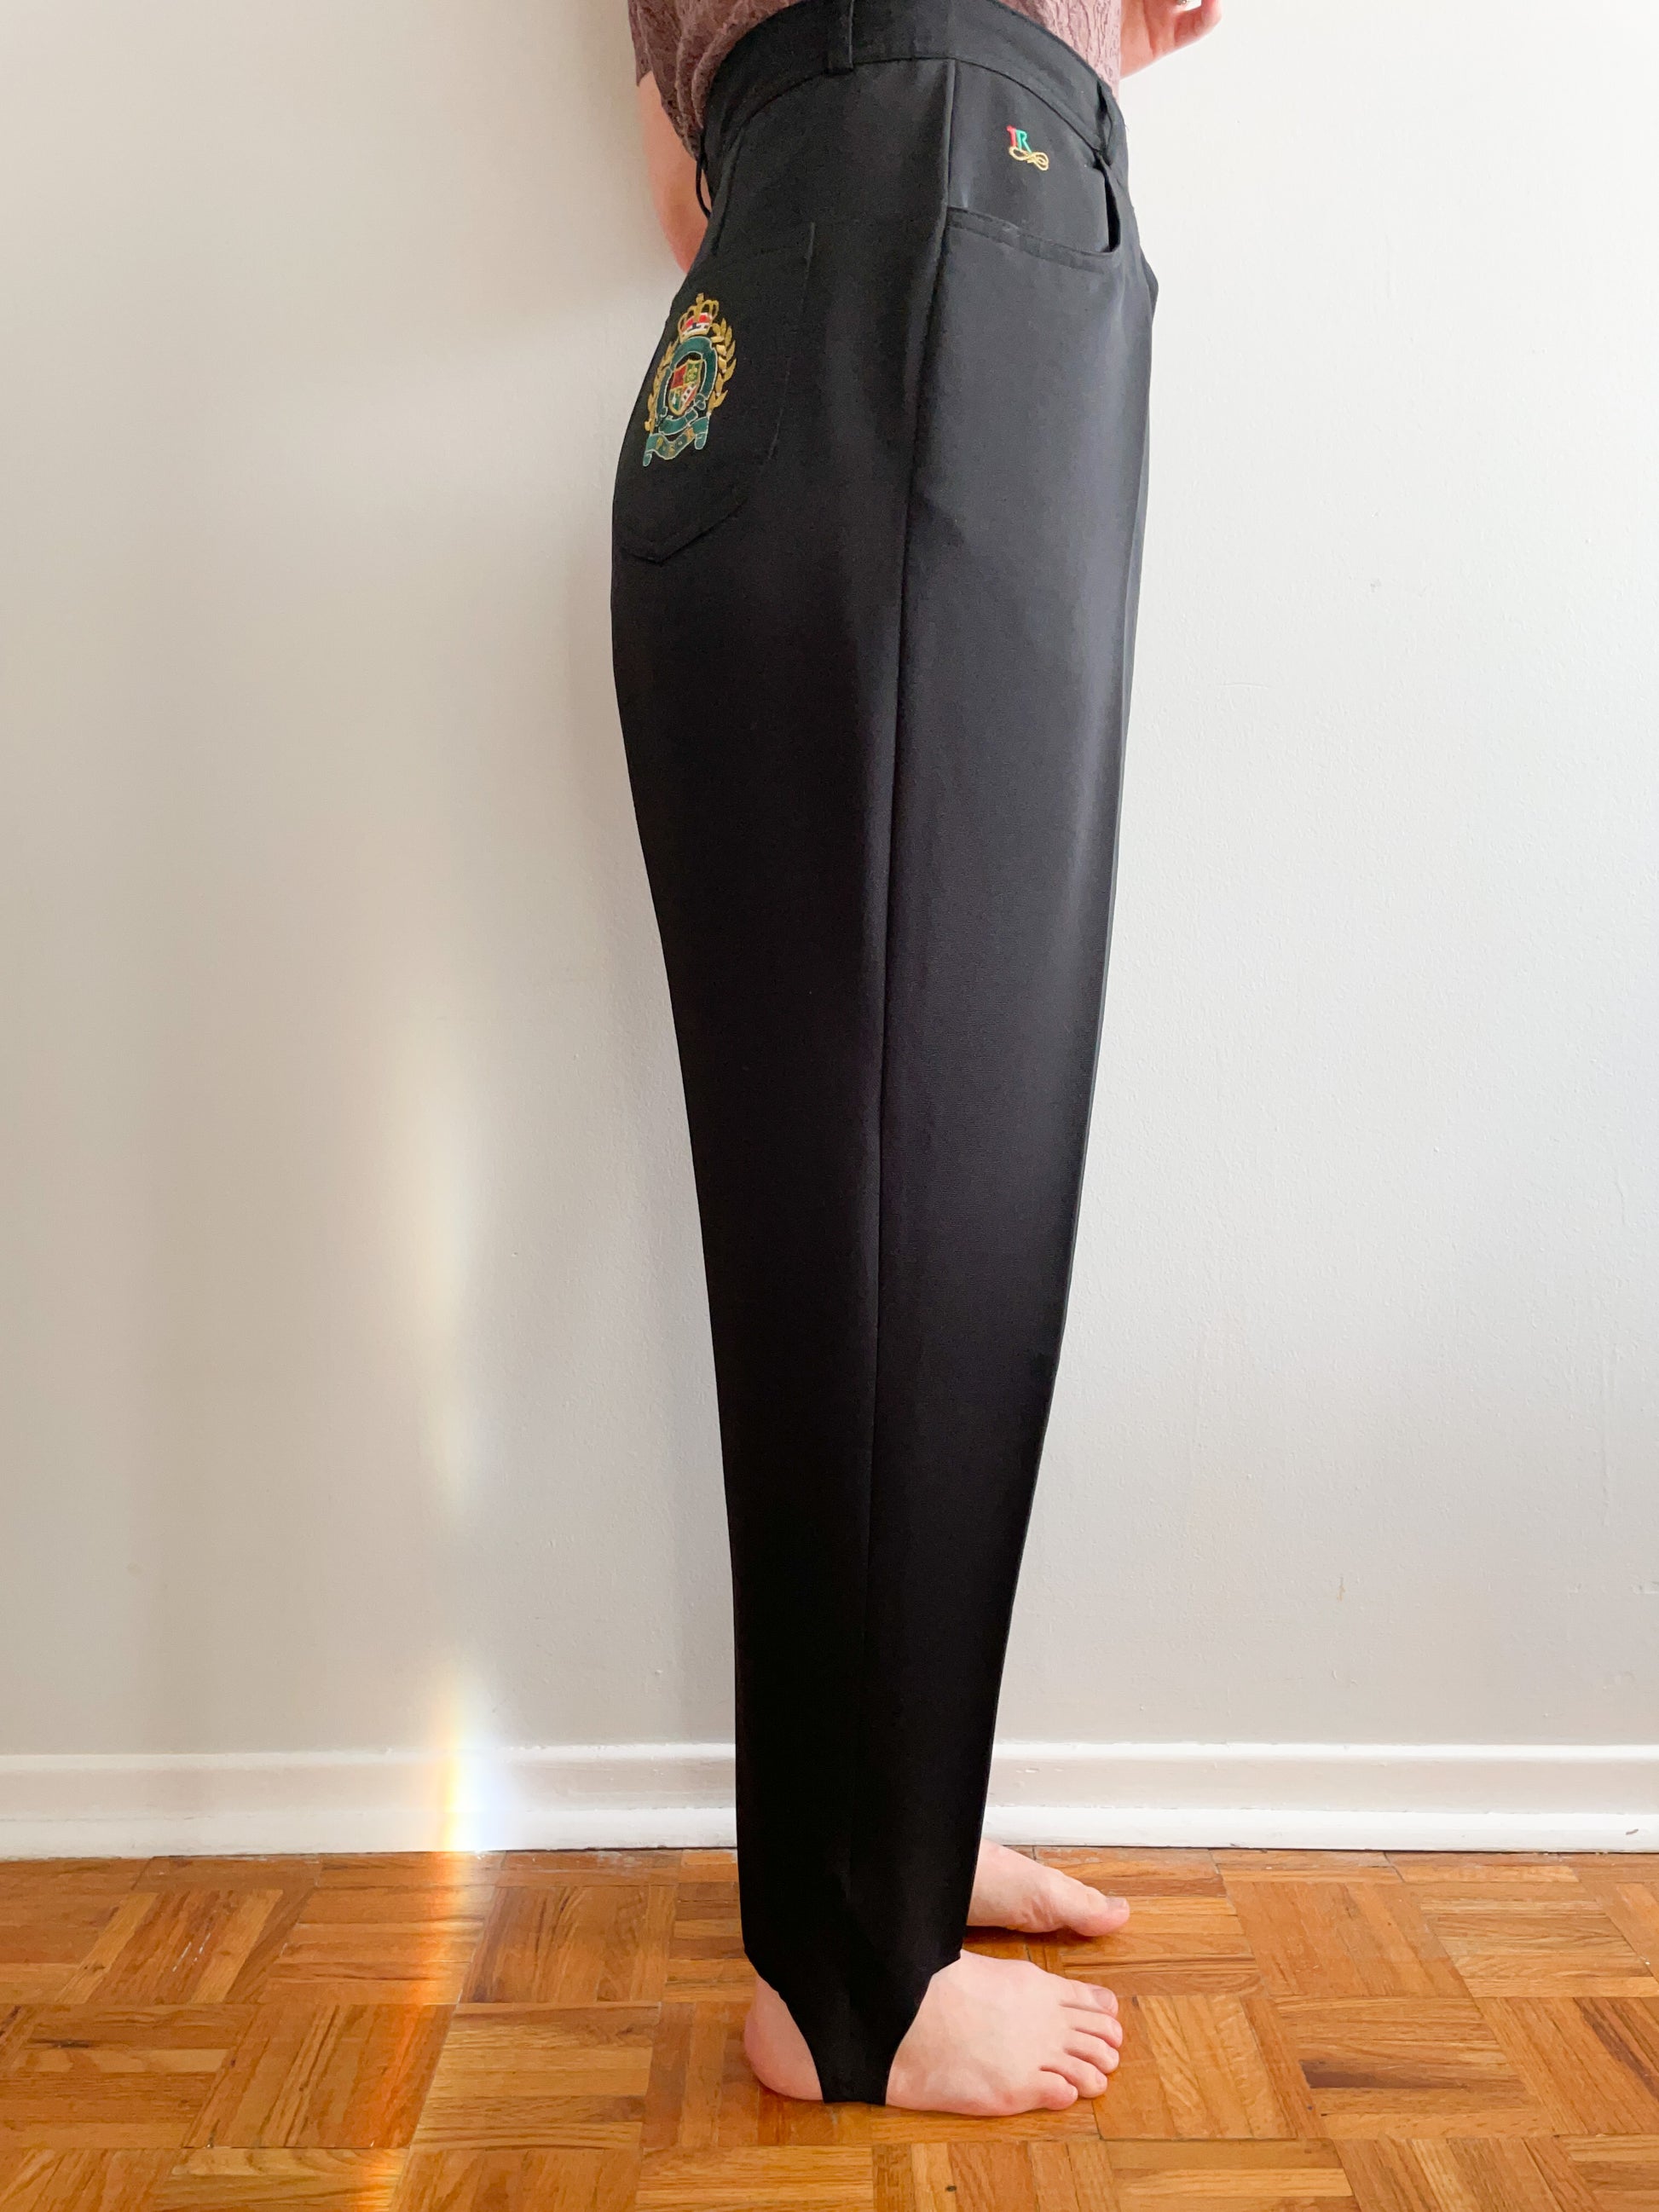 The Limited Womens Stirrup Pants Black Size 10 Tapered Leg Button High Rise